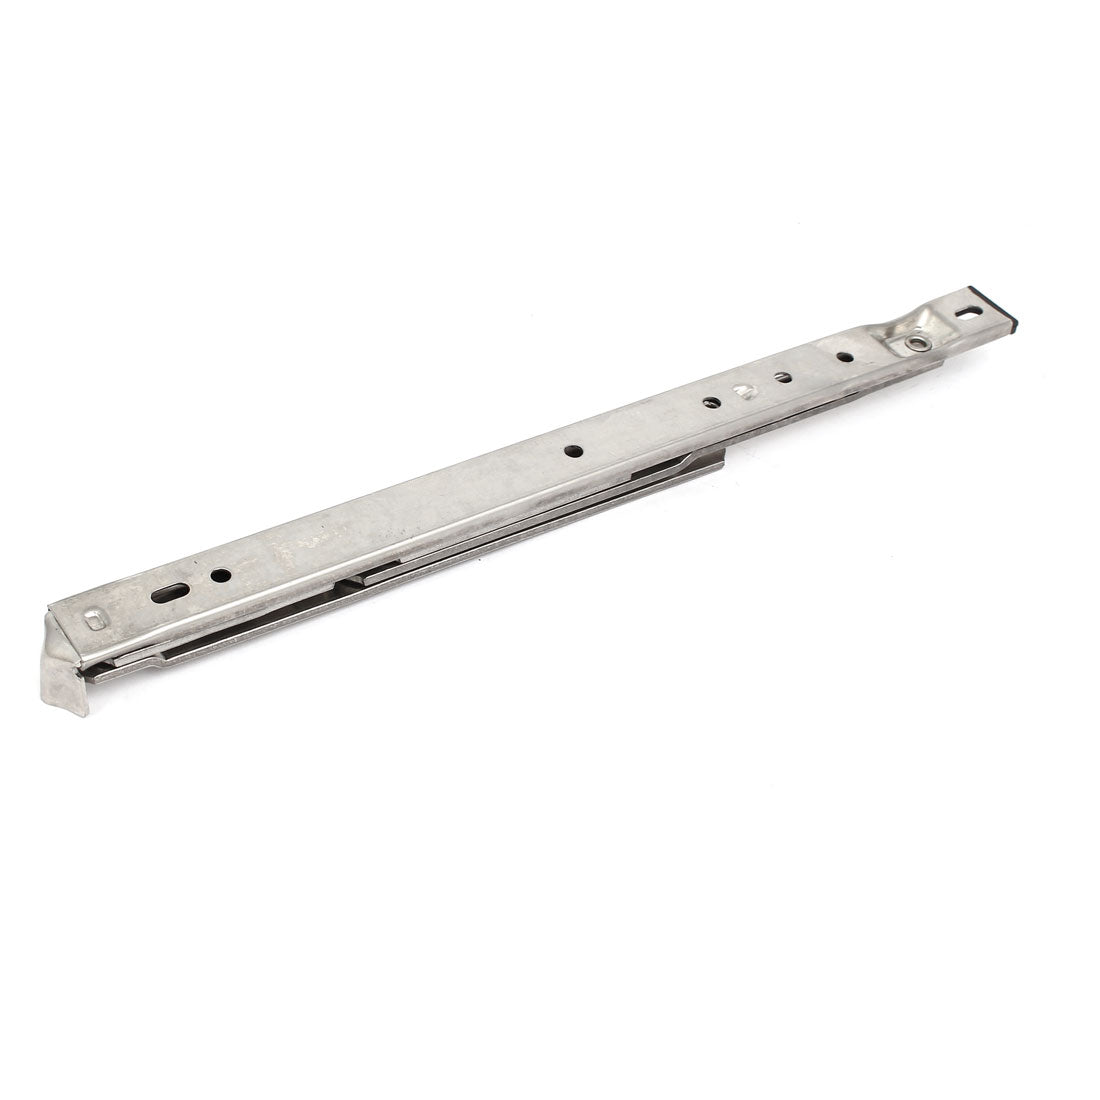 uxcell Uxcell 12-inch 202 Stainless Steel Foldable Casement Window Friction Hinge 4 Bar 2pcs